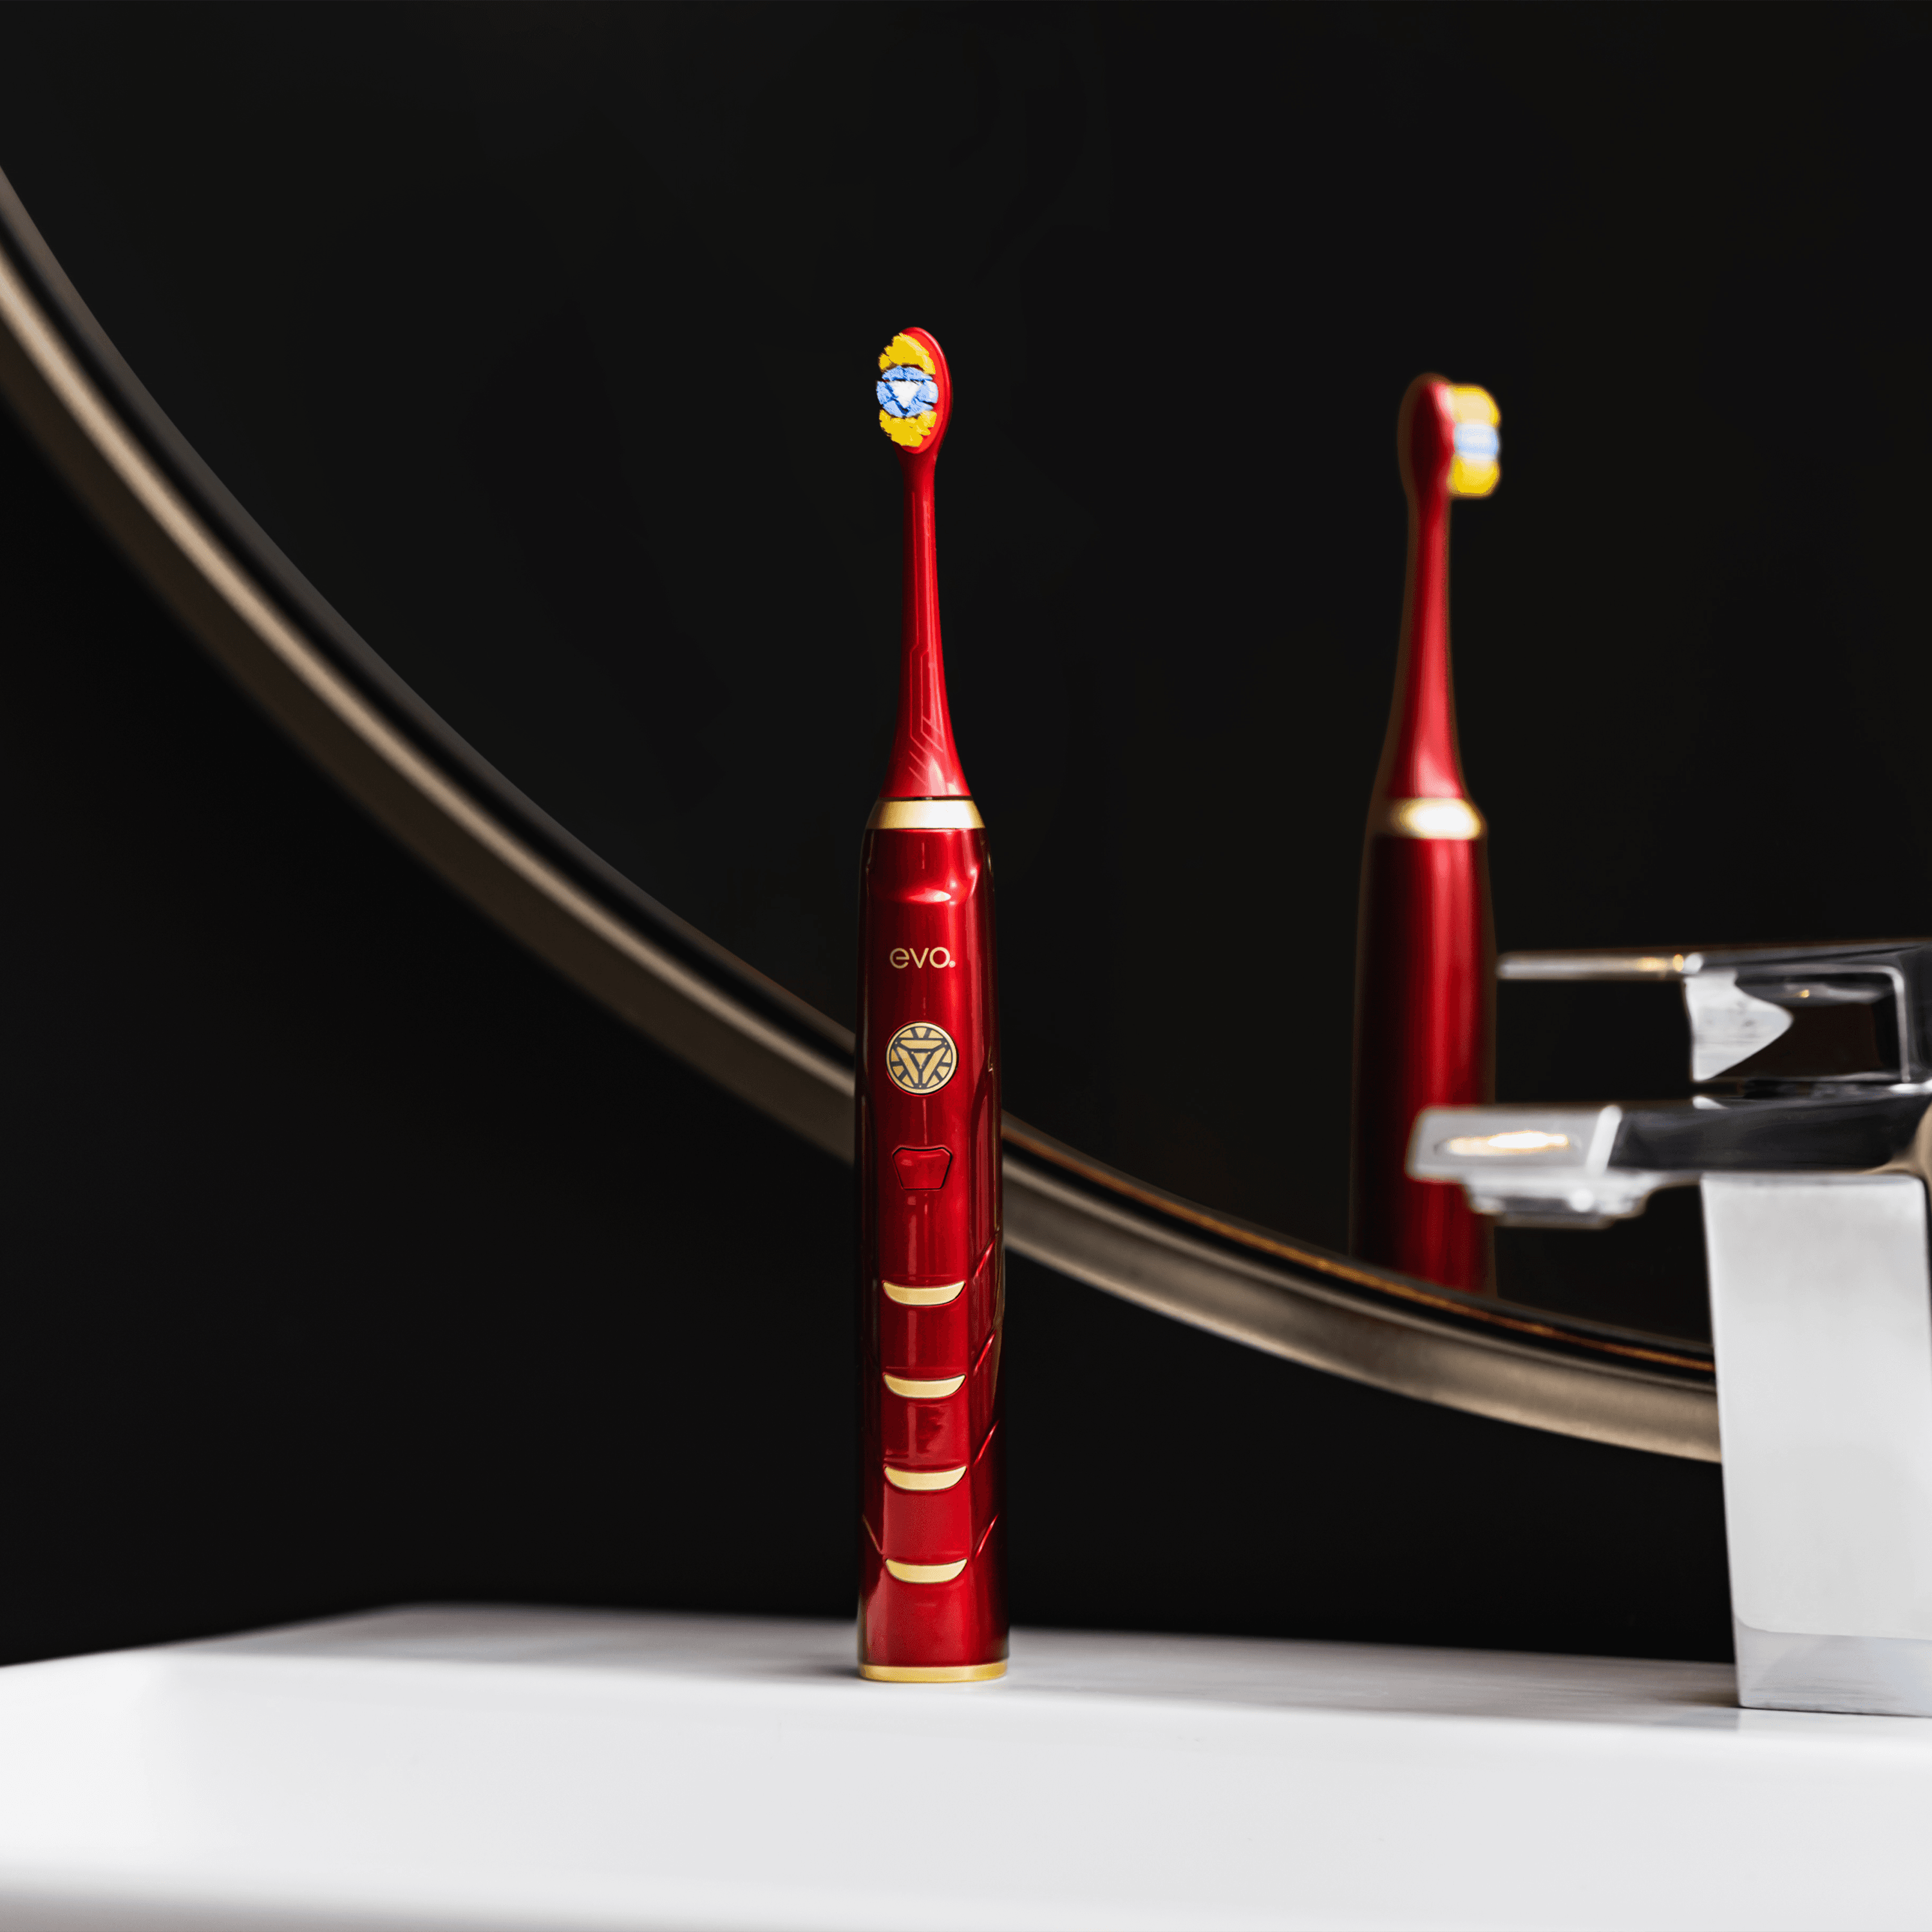 IRM-1 Iron Man Rechargeable Sonic Toothbrush - EVO